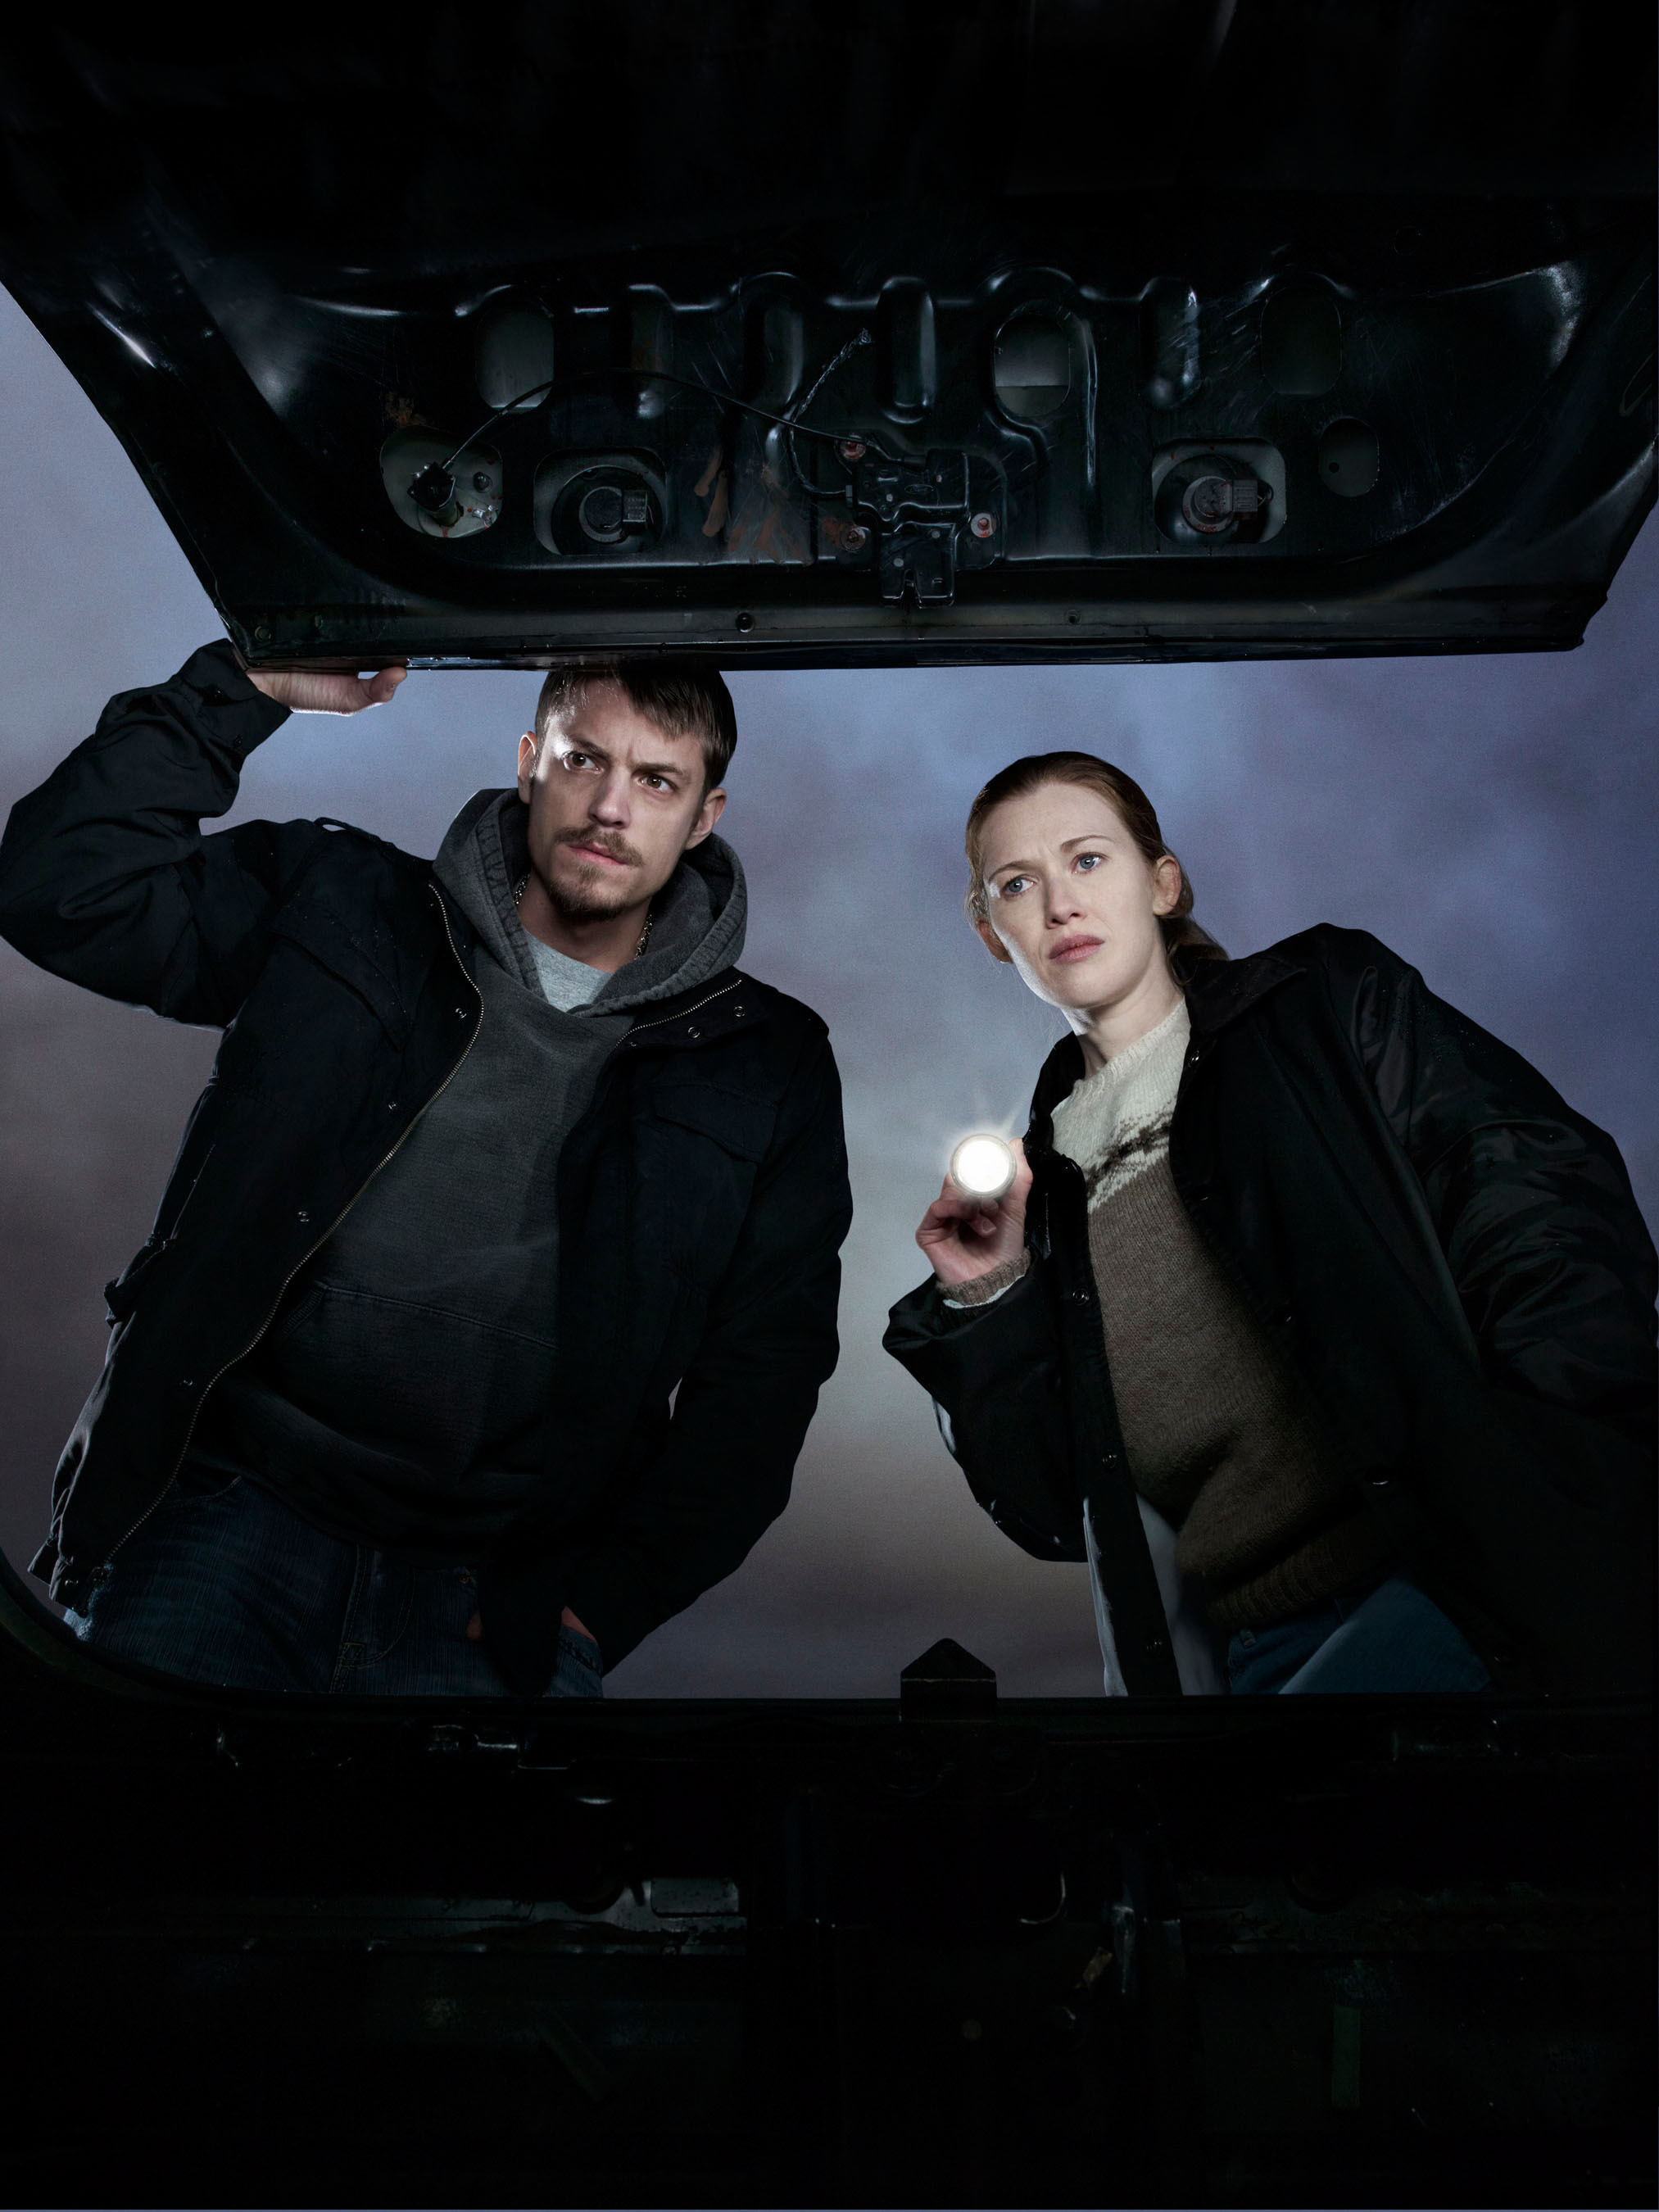 Netflix Announces The Killing Season 3 Coming Exclusively to Its Streaming Members Globally. (PRNewsFoto/Netflix, Inc.) (PRNewsFoto/NETFLIX, INC.)